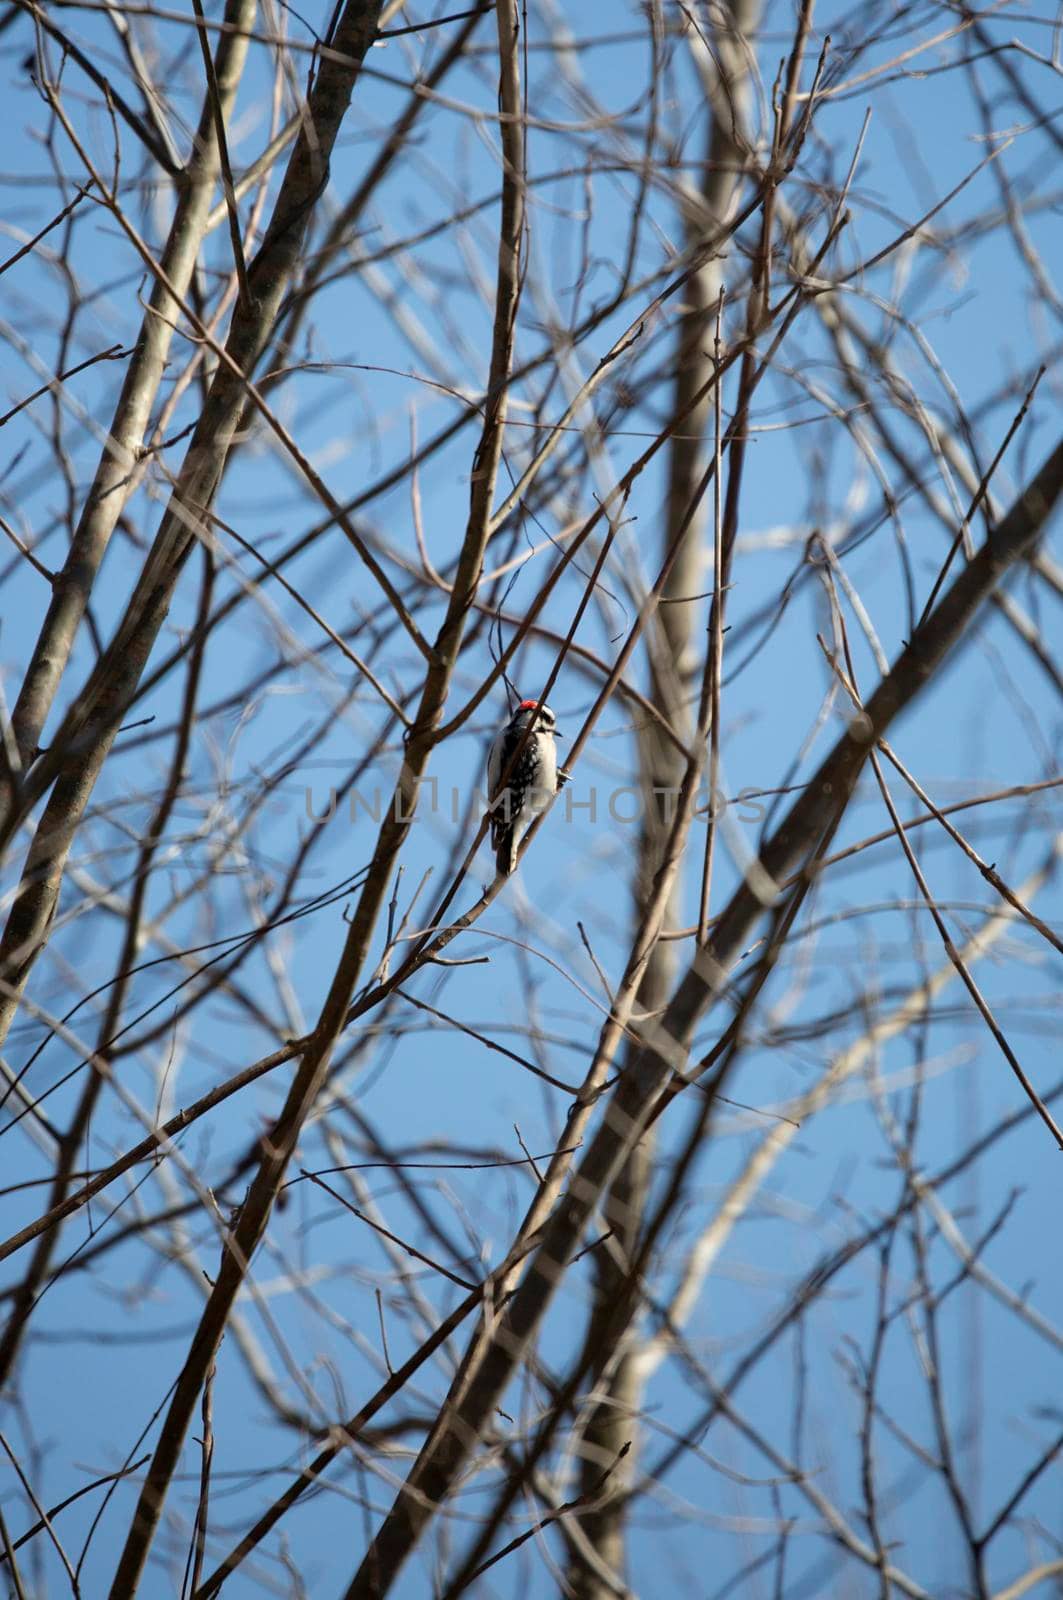 Downy woodpecker (Picoides pubescens) with its head cocked back preparing to drill into a tree branch